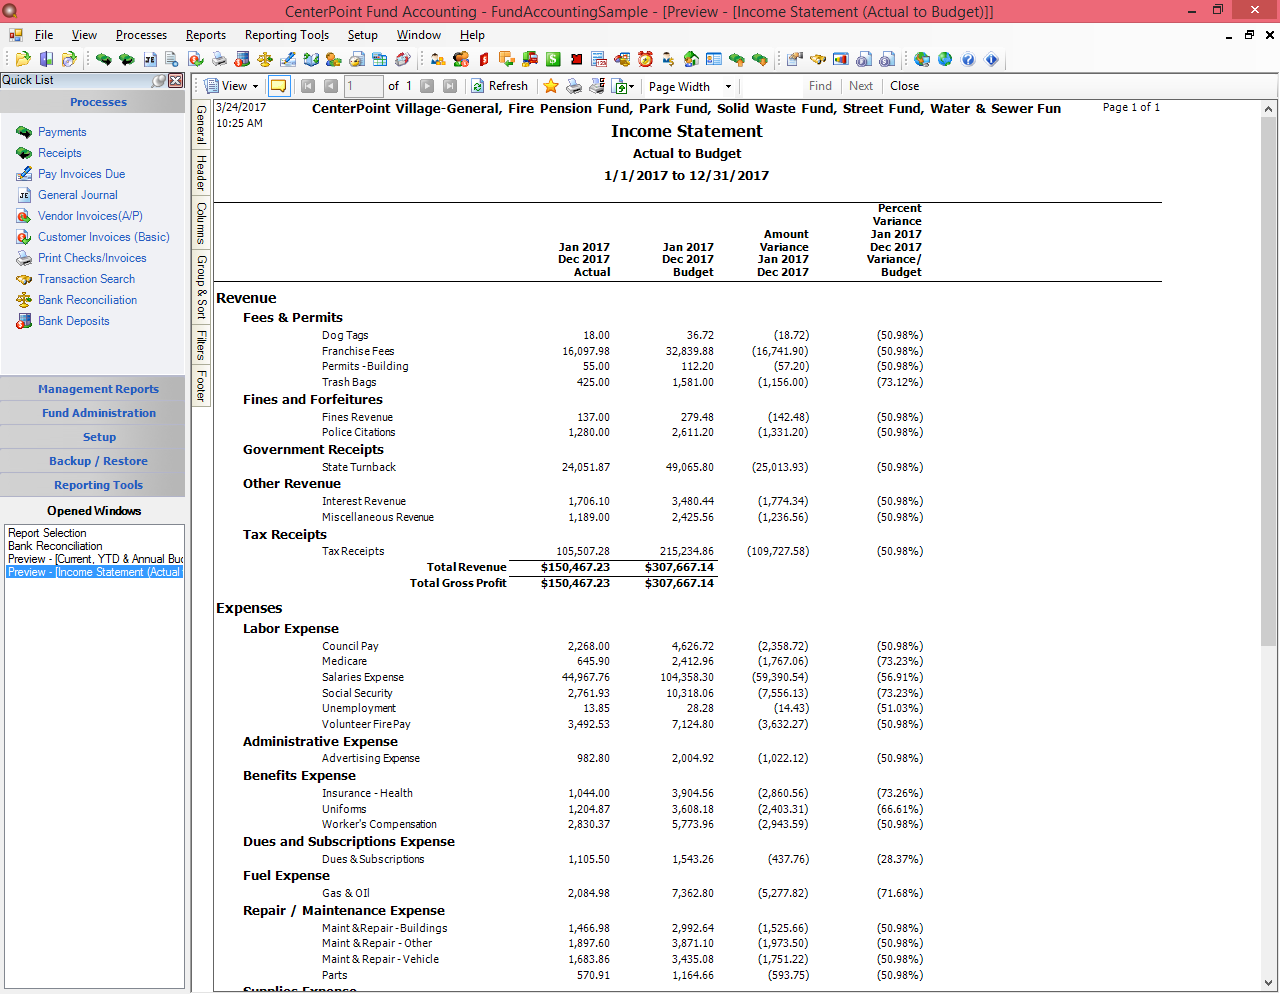 Actual to Budget Income Statement